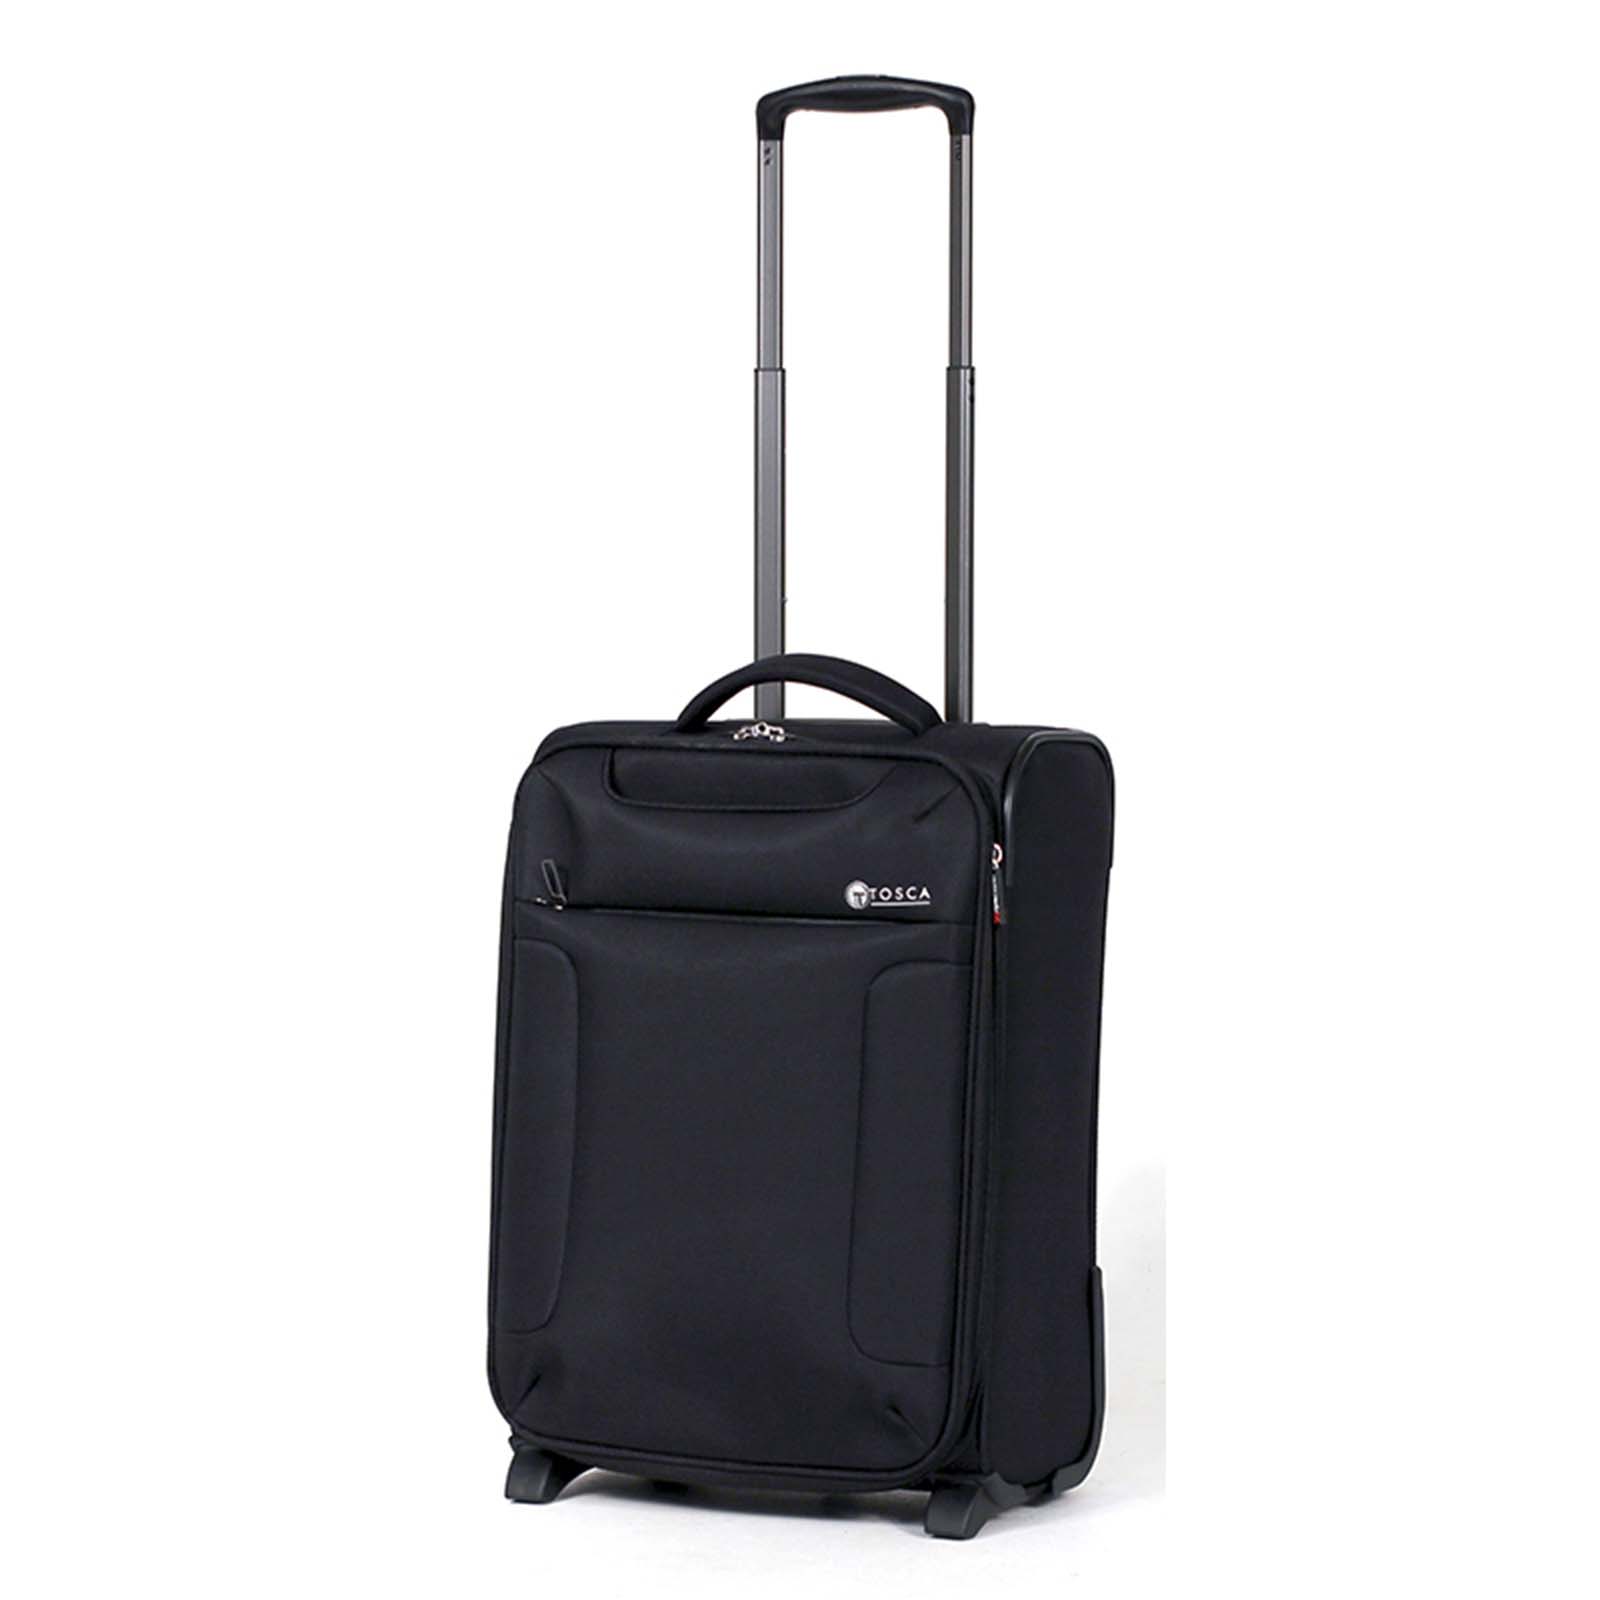 tosca-so-lite-2-wheel-carry-on-suitcase-black-front